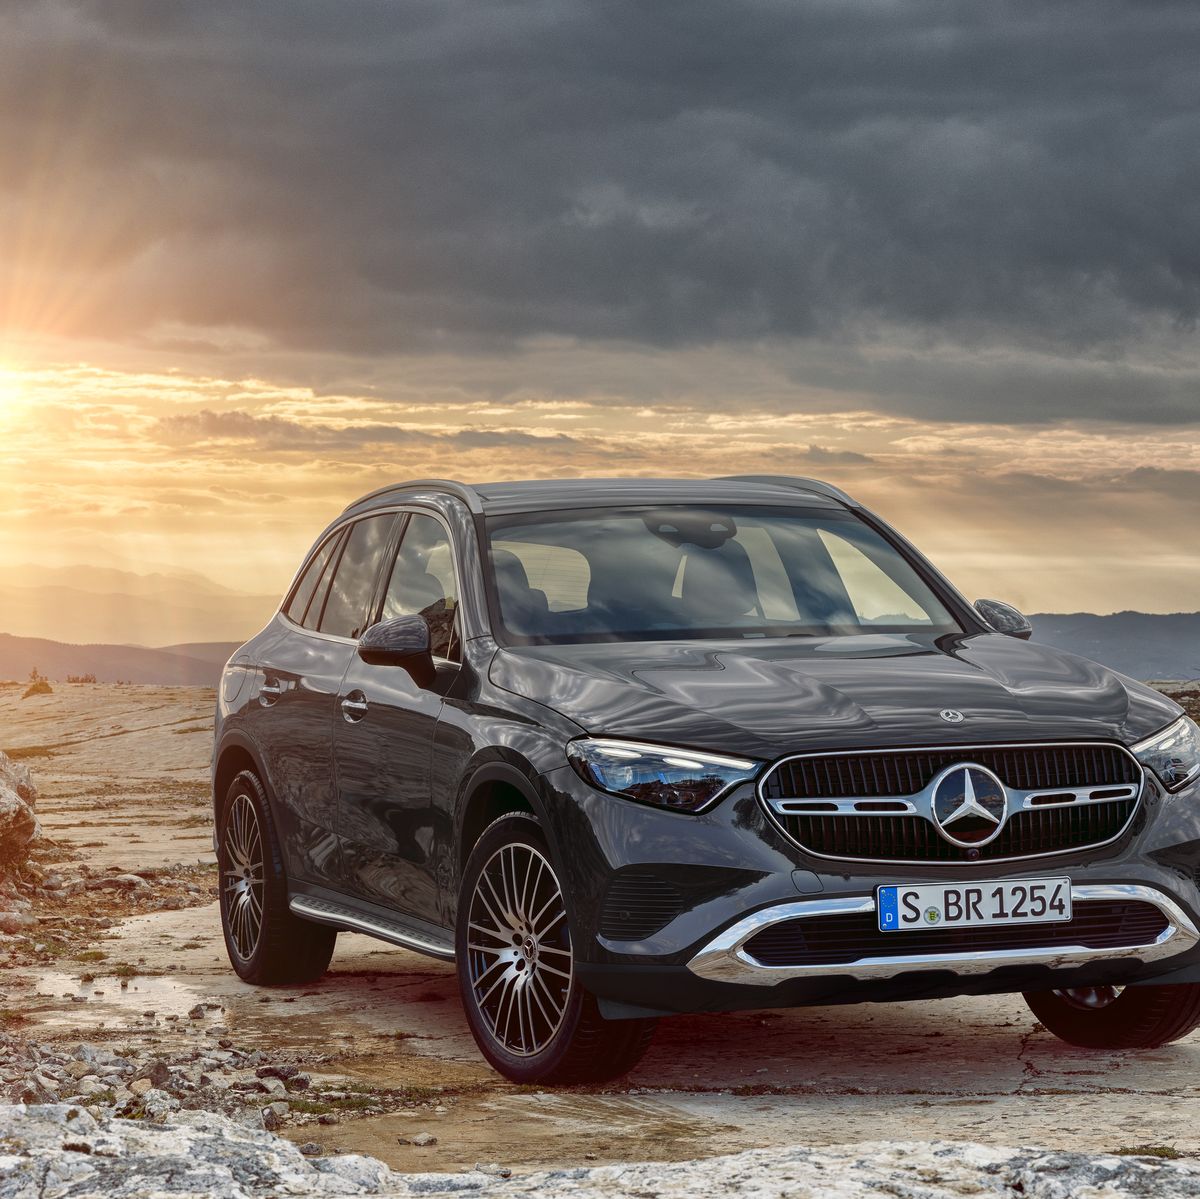 New Mercedes-AMG GLC Coupe revealed: everything we know so far